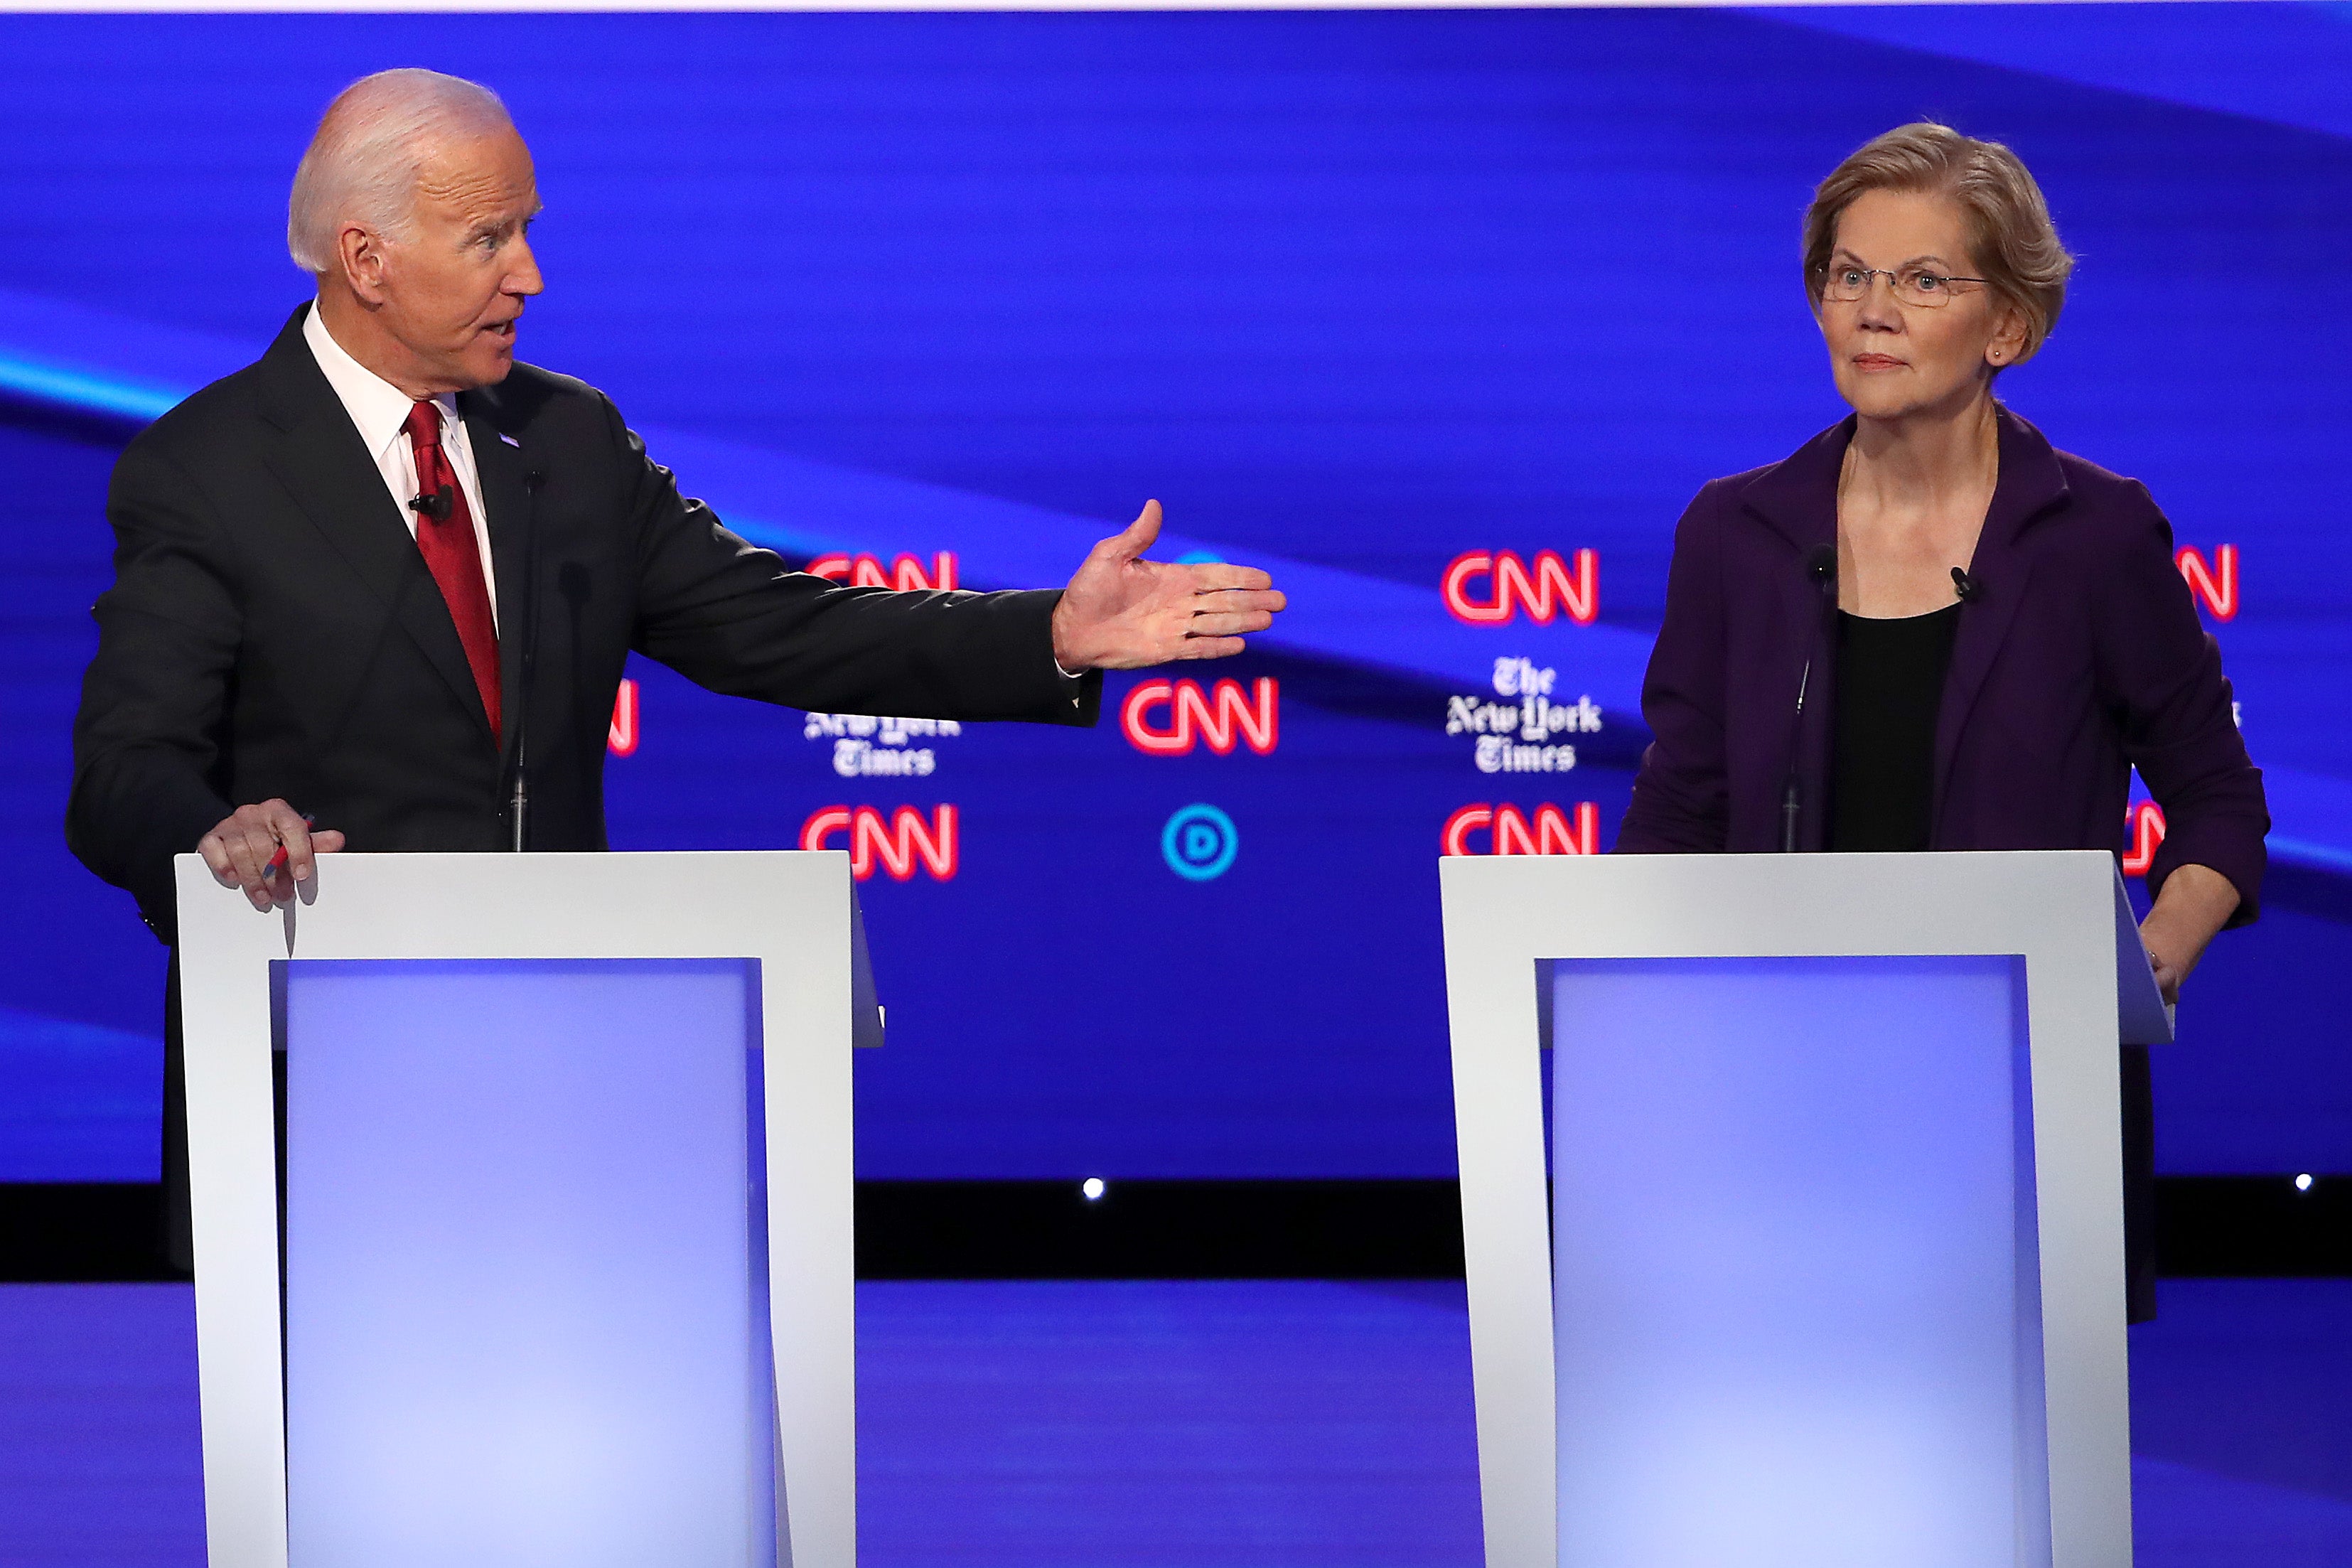 The Theme of Last Night's Democratic Debate Was 'Come For The Queen'